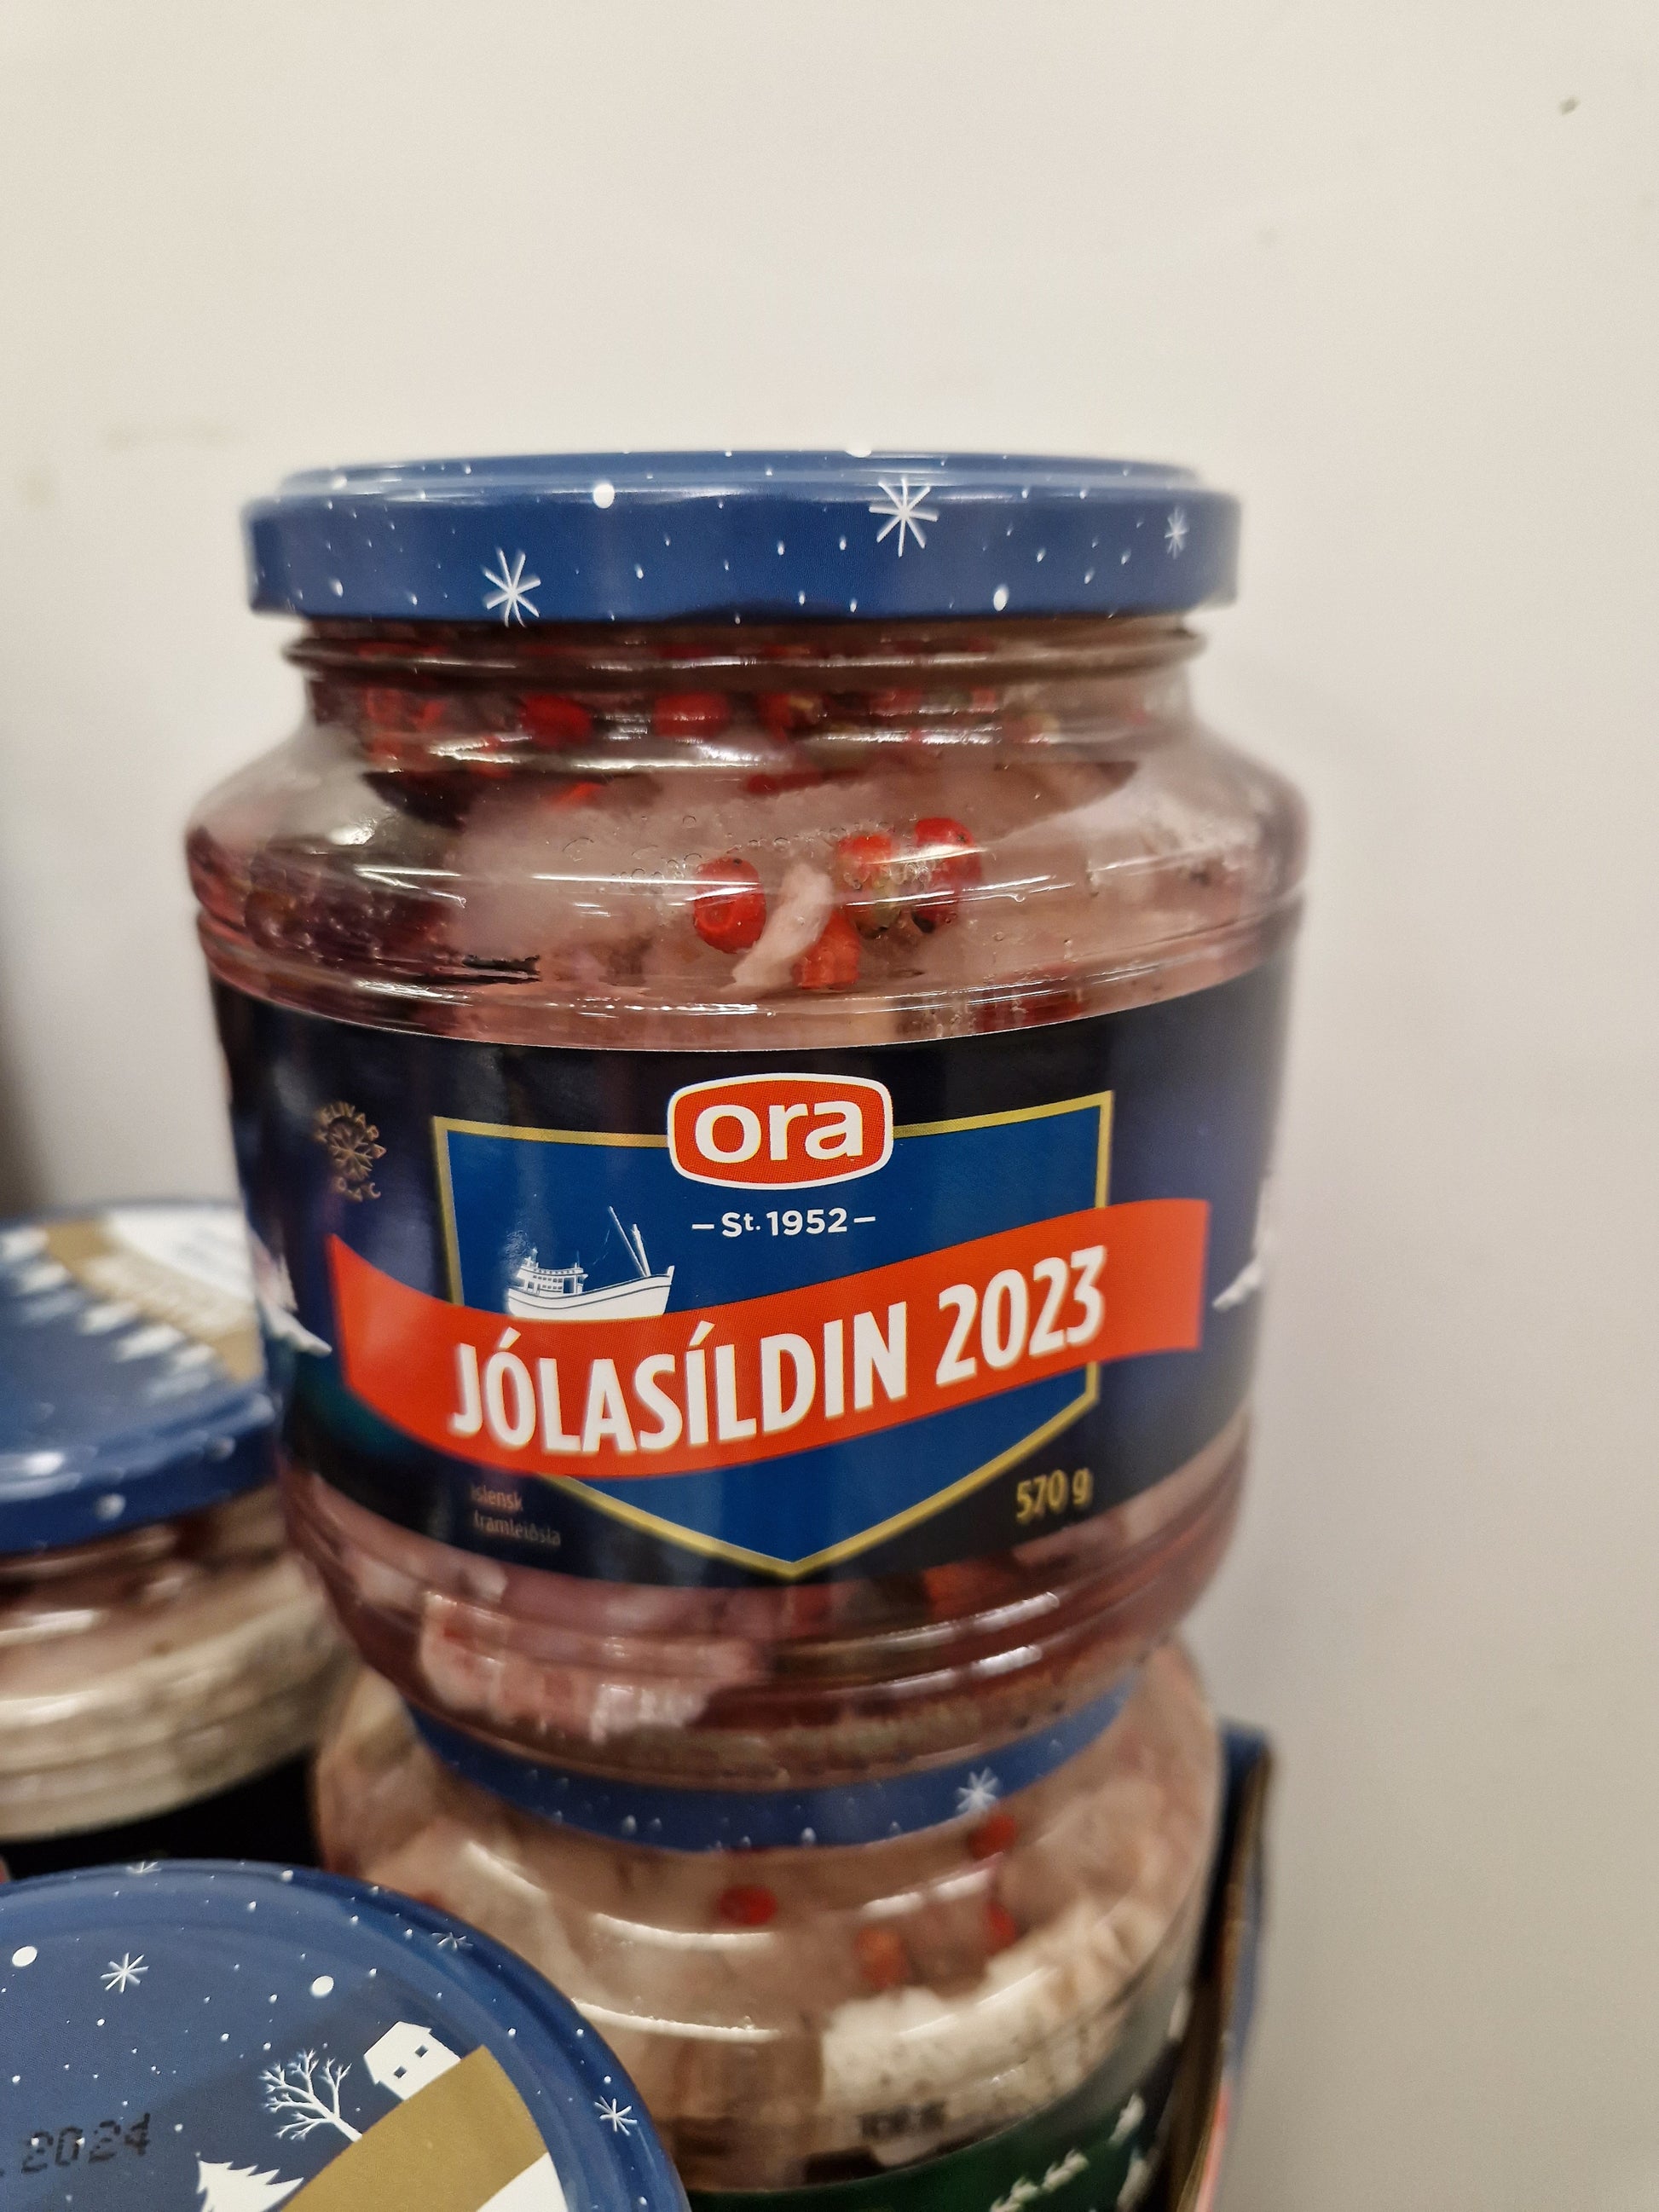 Ora Christmas Herring or Jólasíld, only available over the Christmas time. -TopIceland